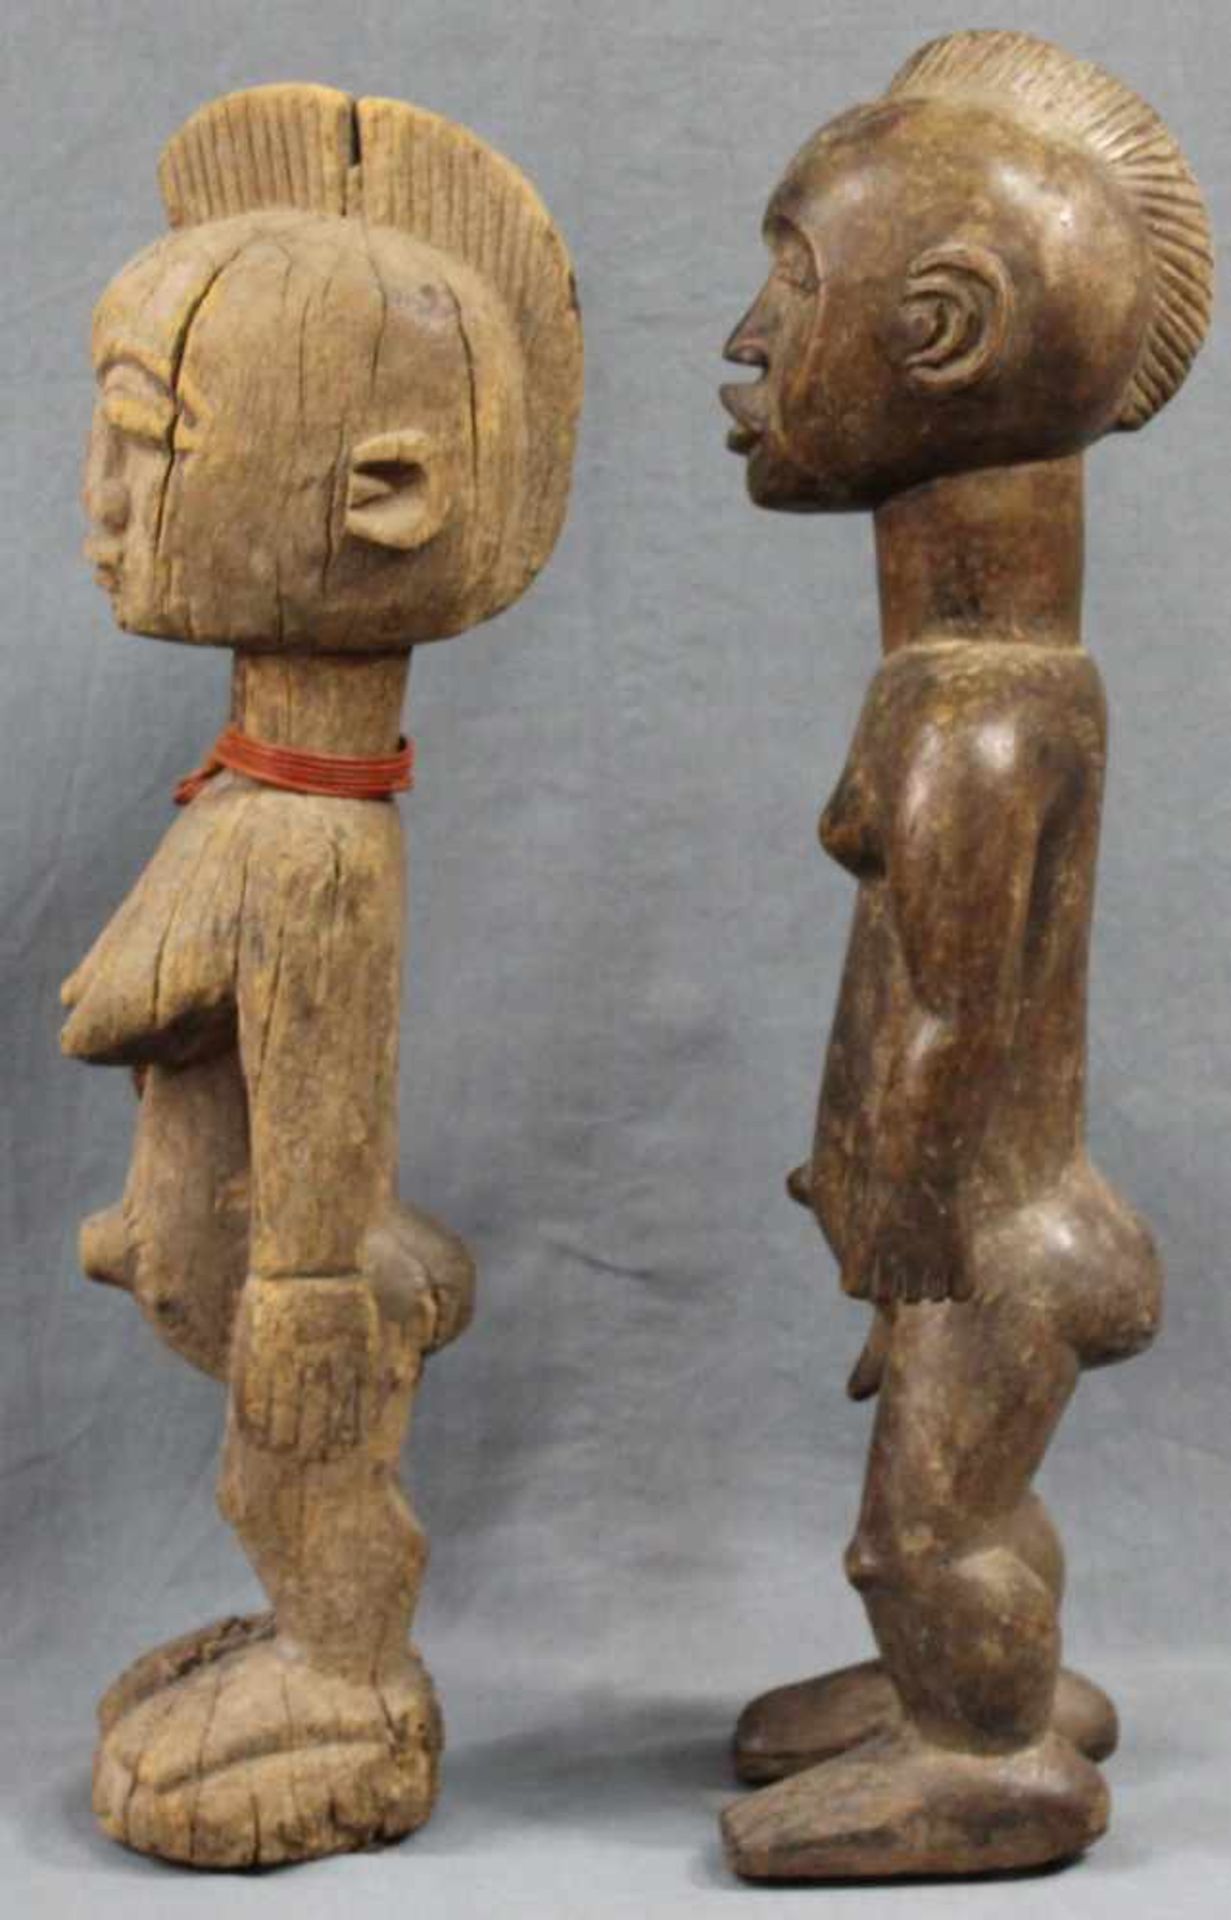 2 figures. Woman and man. Wood. Up to 50 cm high. - Image 5 of 9